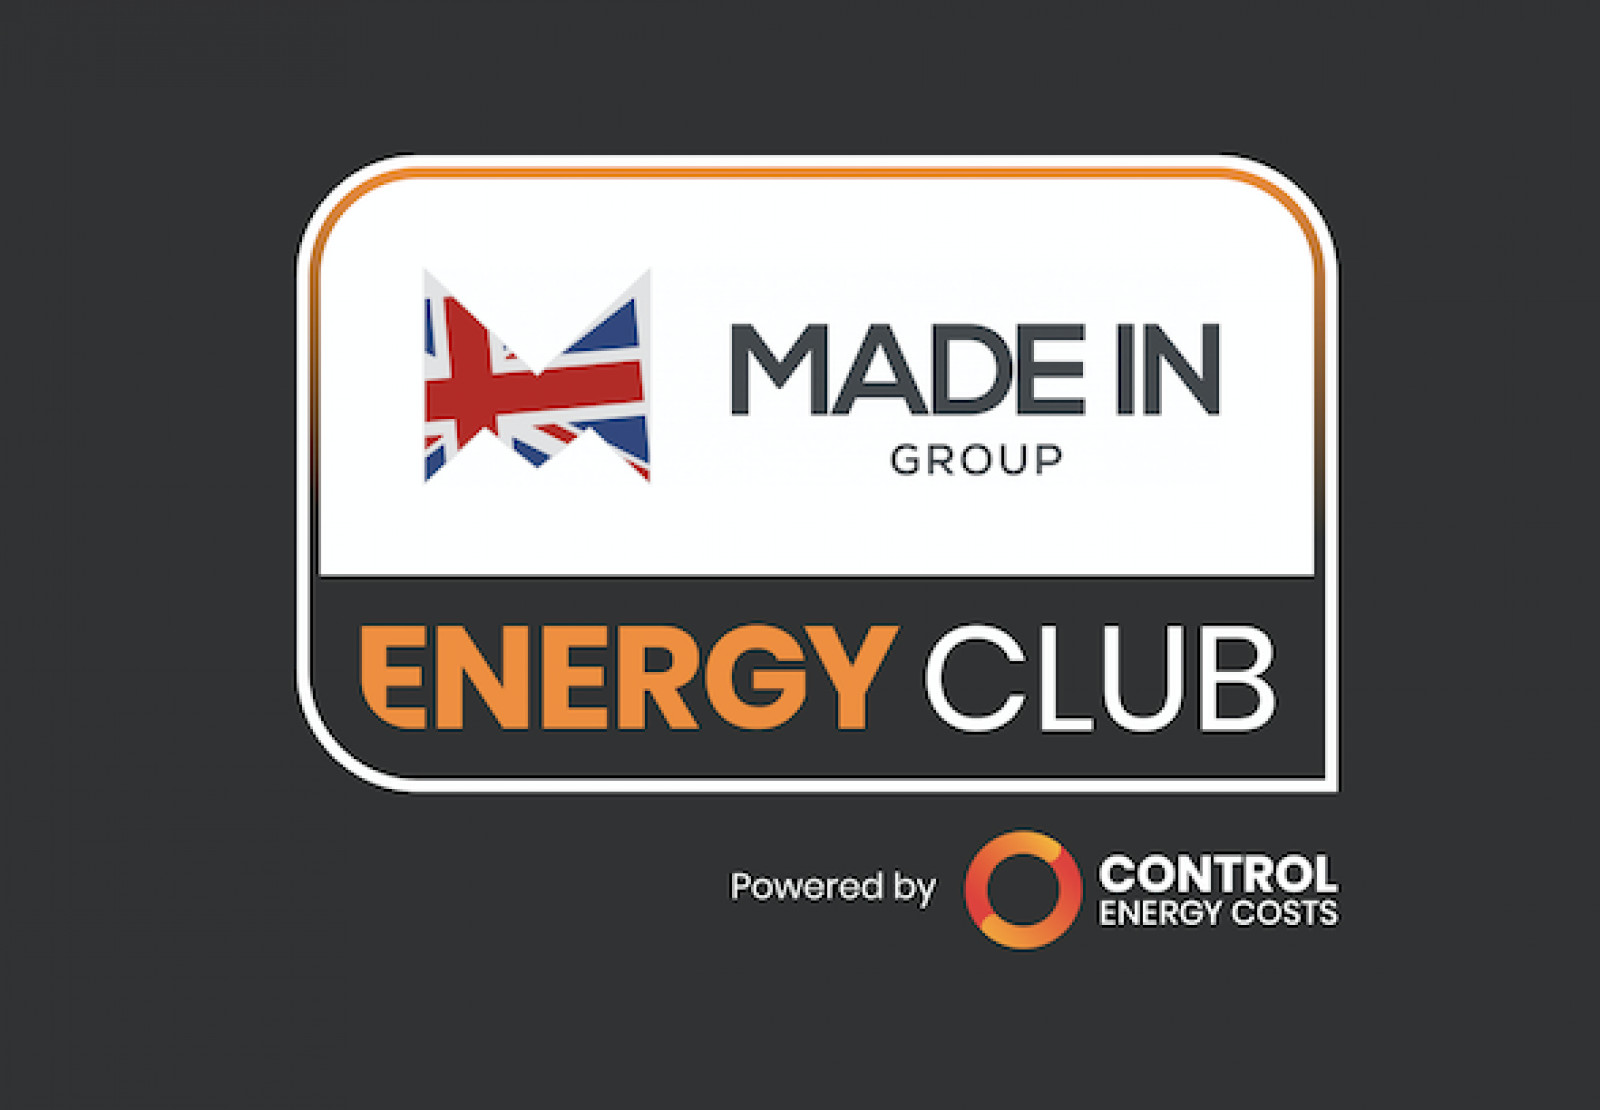 The Made In Energy Club